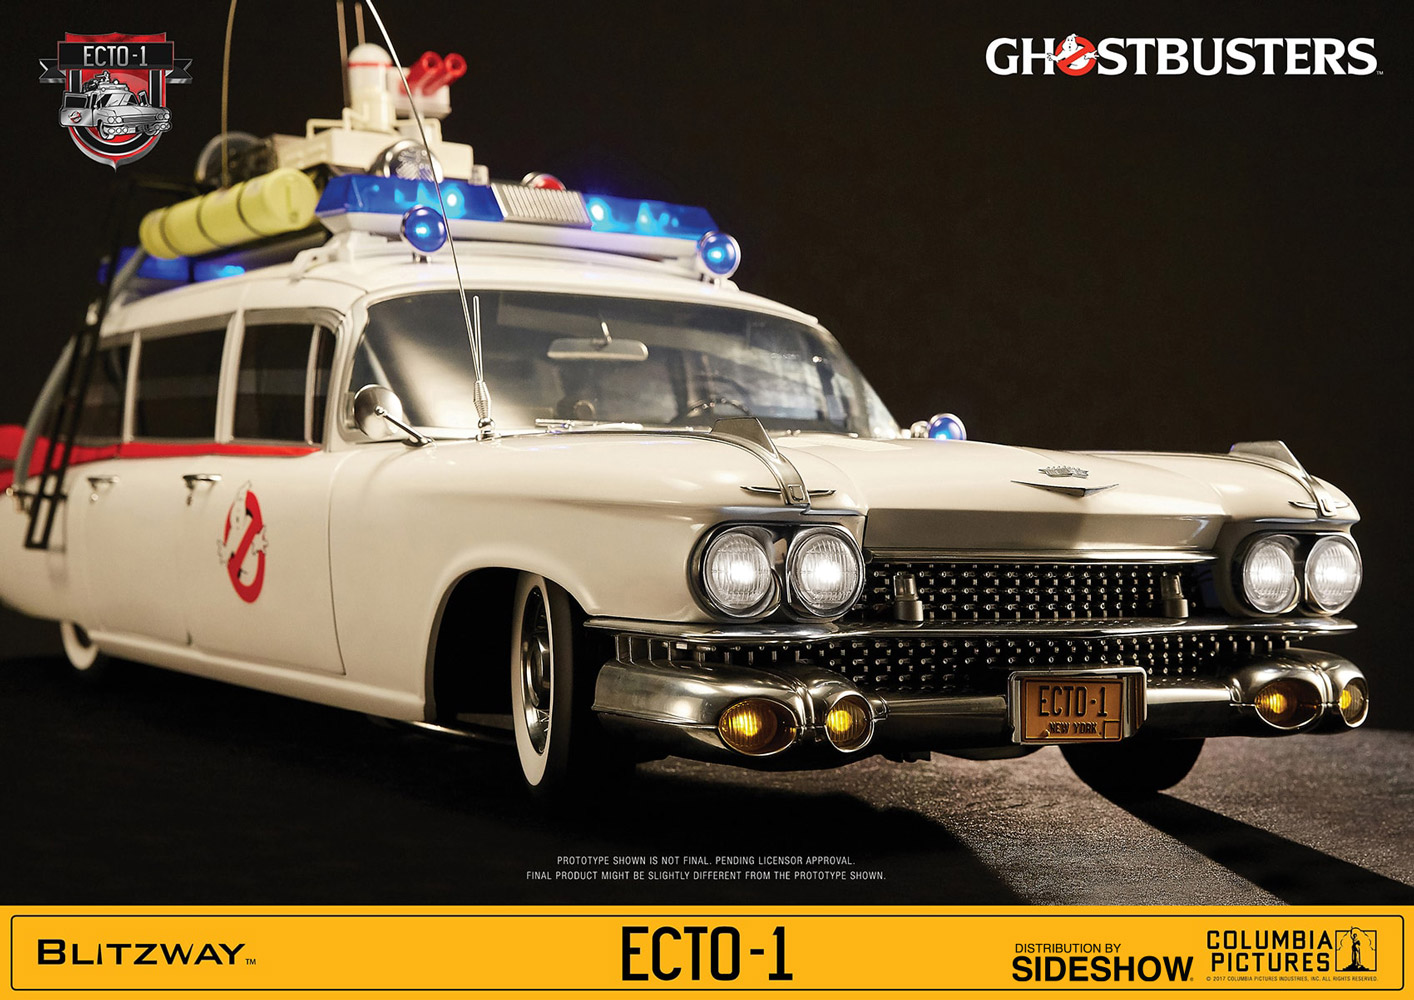 ghost-busters-1984-ecto-1-sixth-scale-related-product-blitzway-903261-20.jpg